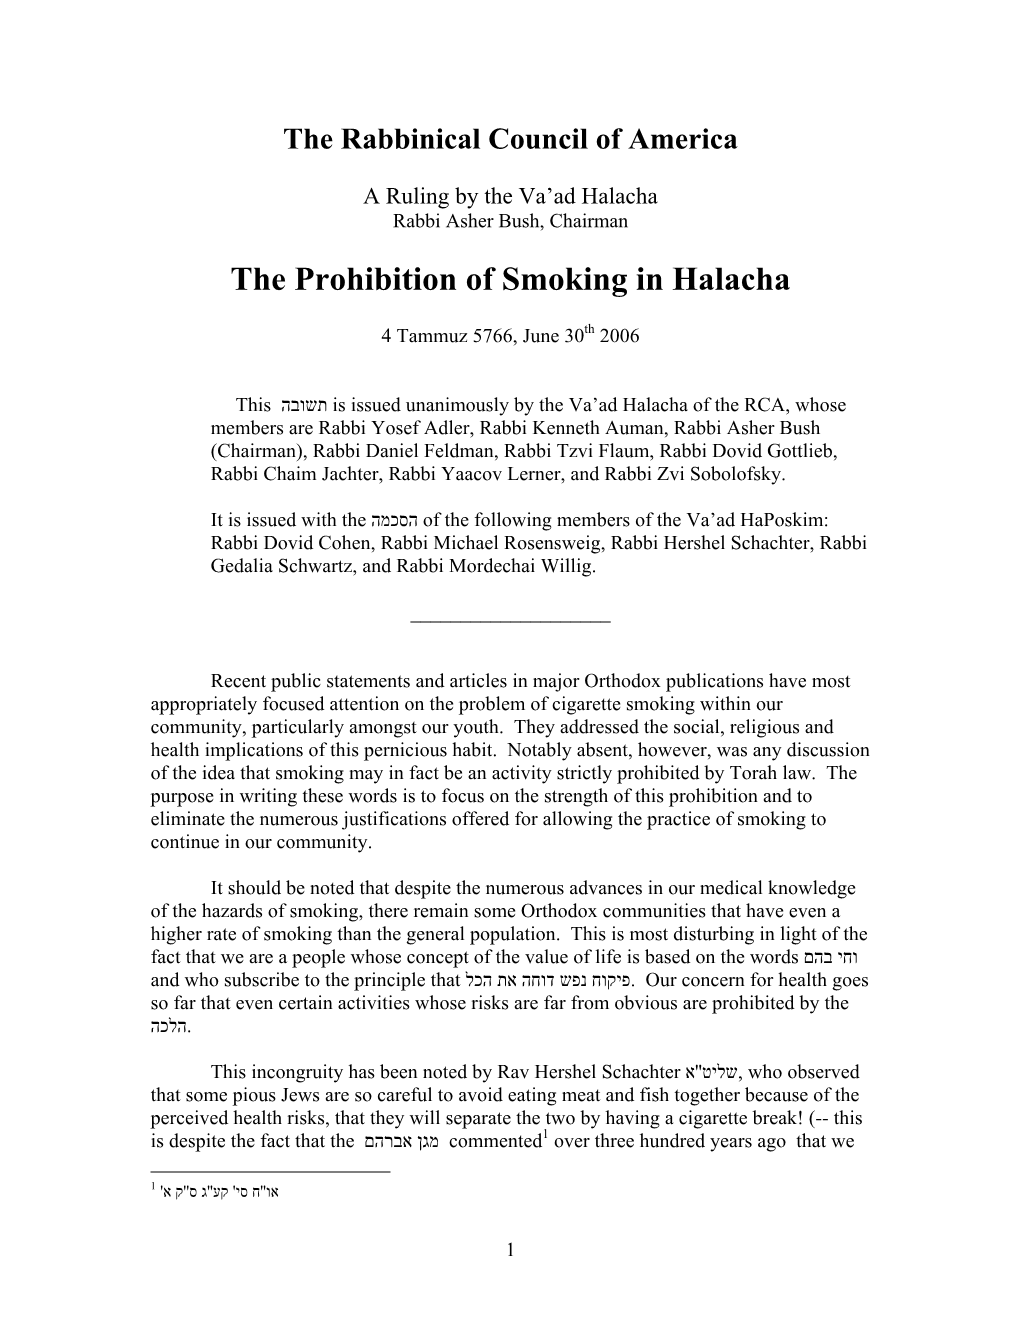 The Prohibition of Smoking in Halacha